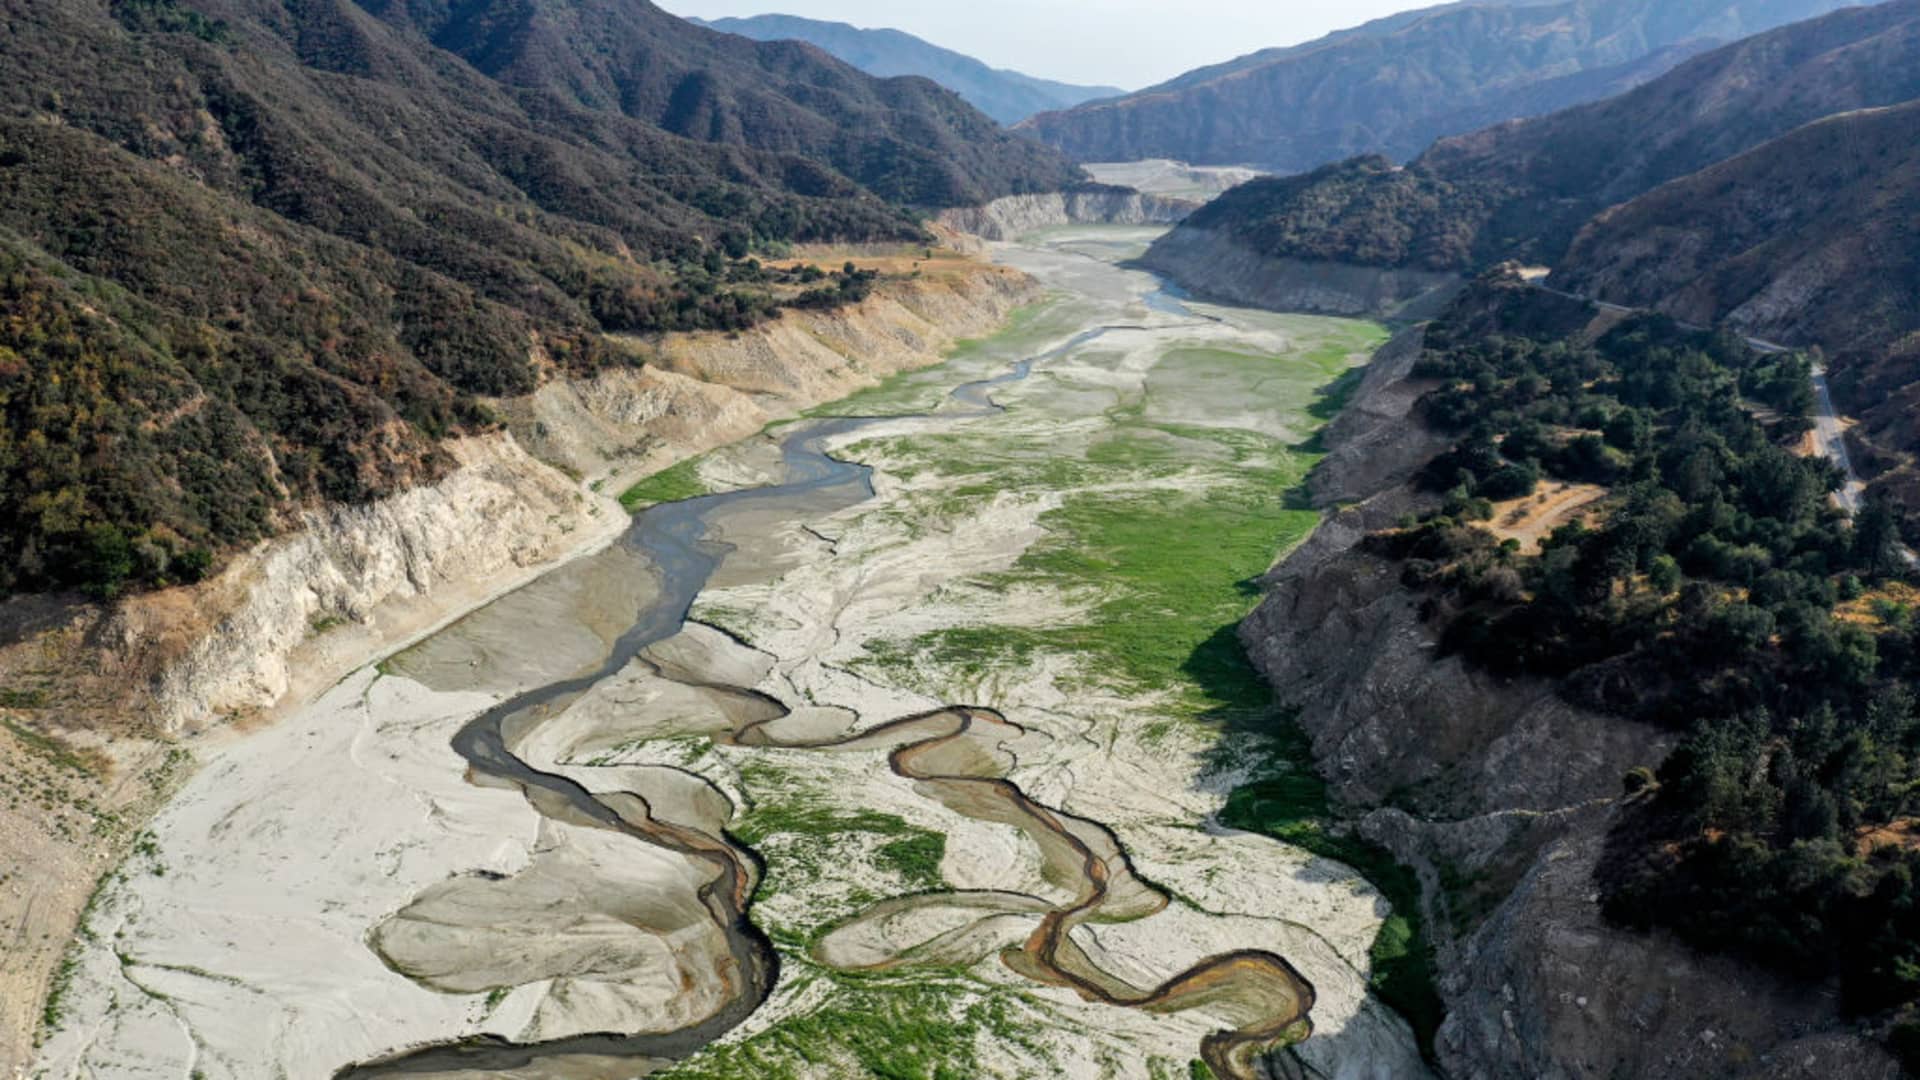 In an aerial view, the San Gabriel River and the exposed lakebed of the San Gabriel Reservoir are seen on June 29, 2021 in the San Gabriel Mountains near Azusa, California.